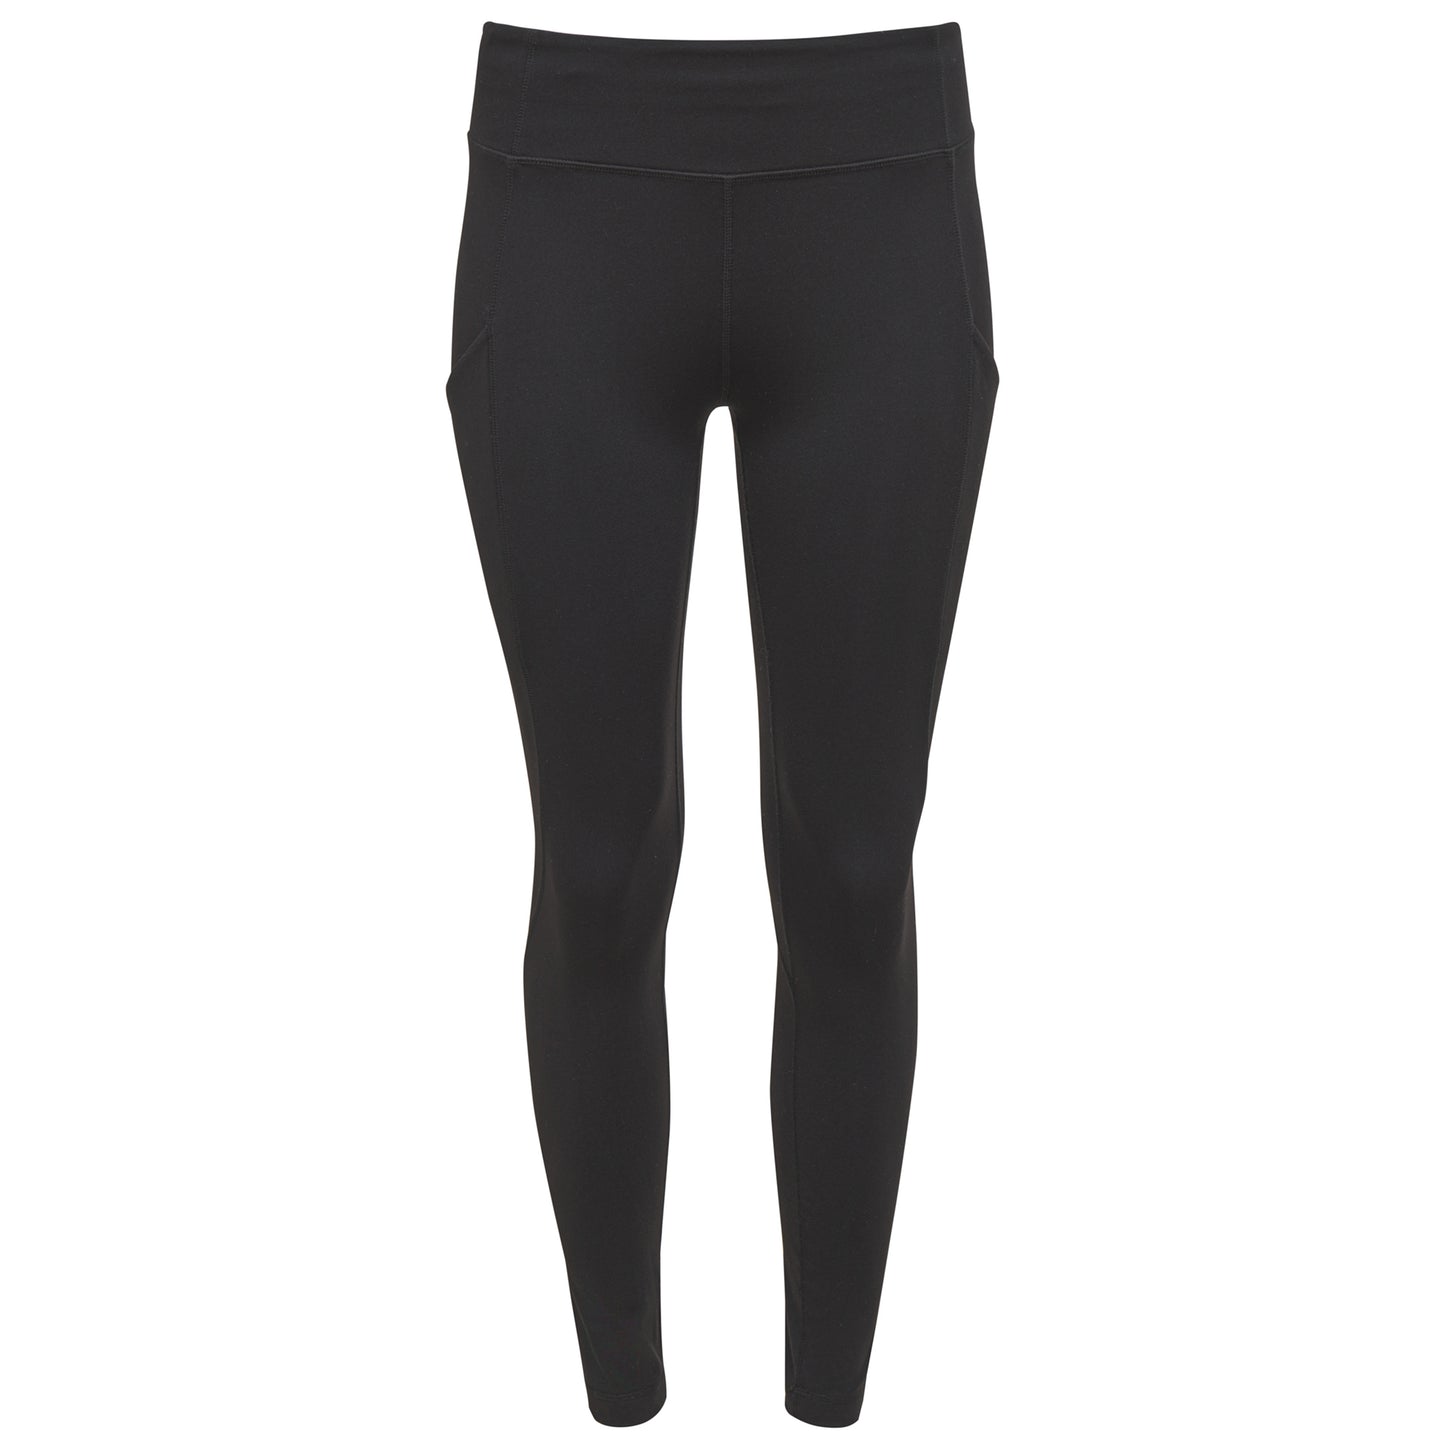 Ghost image of movement high rise leggings in black.